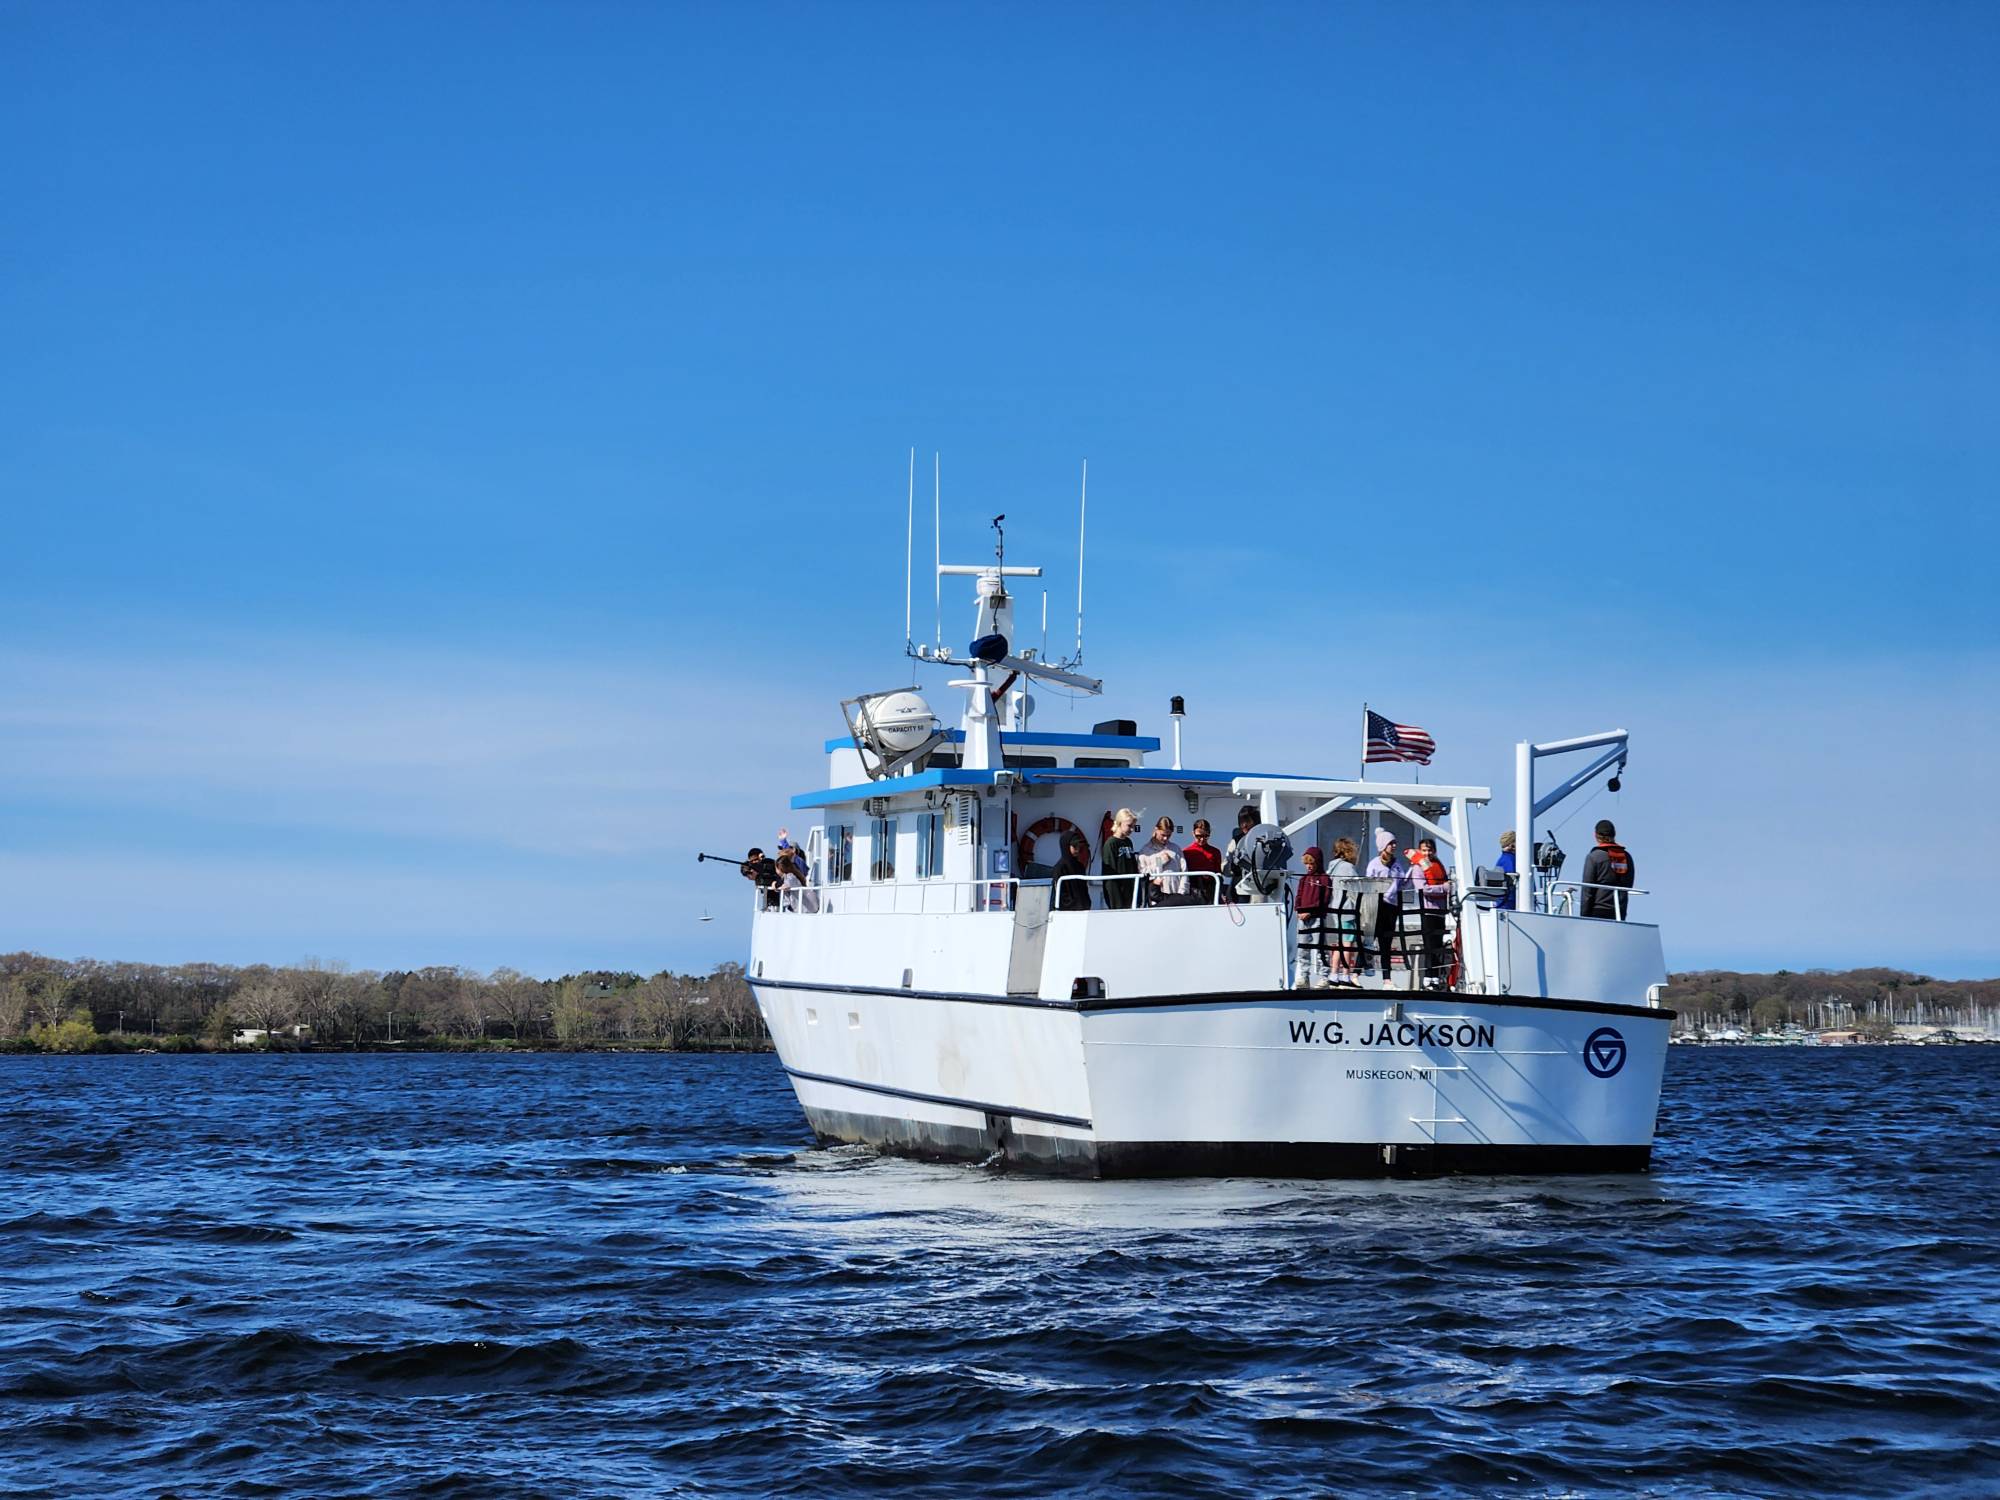 The W.G. Jackson research vessel sails on Muskegon Lake